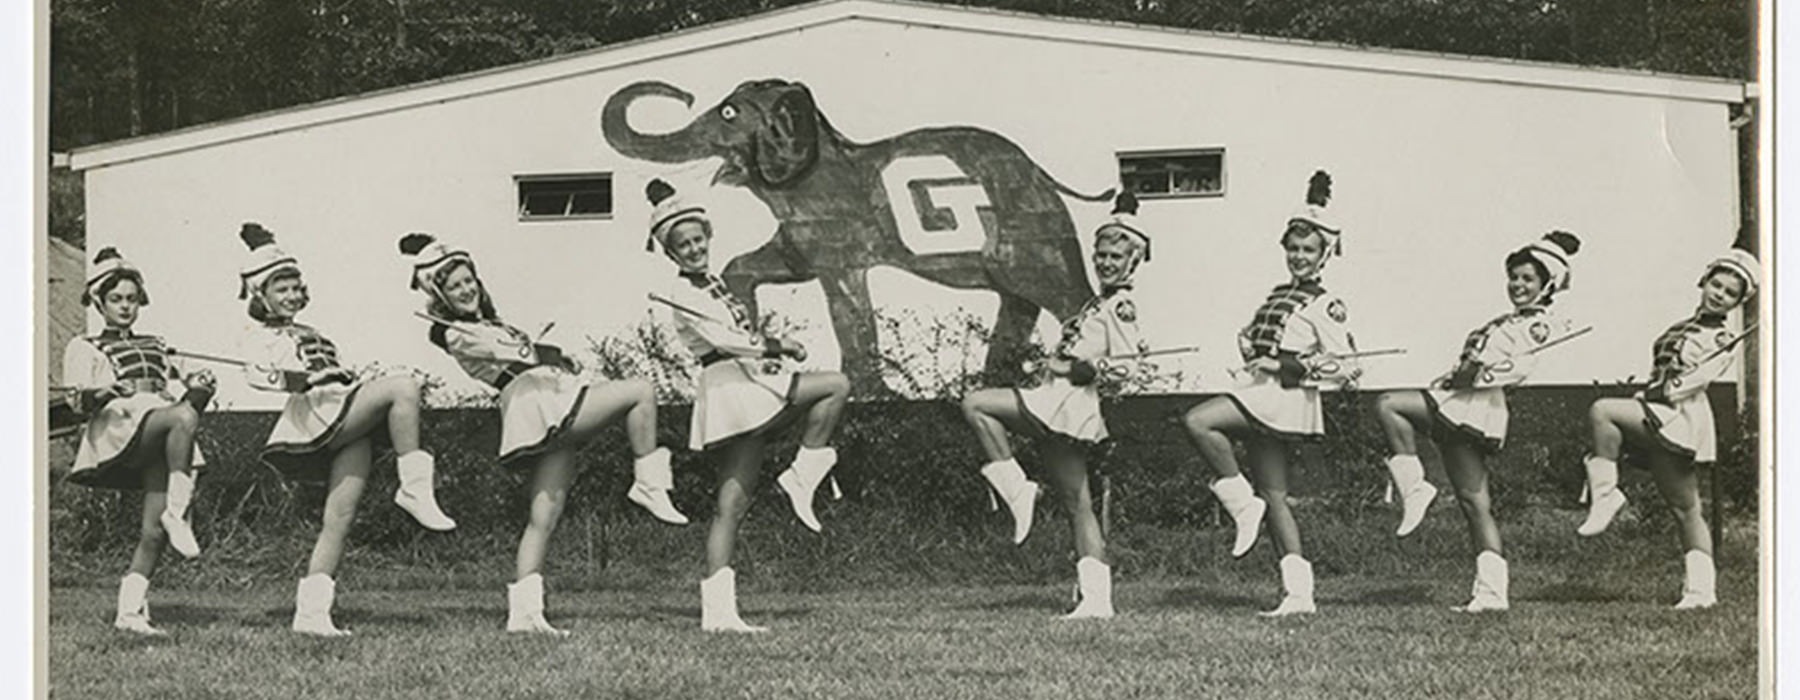 Black and white photo of cheerleaders at Gainesville High school